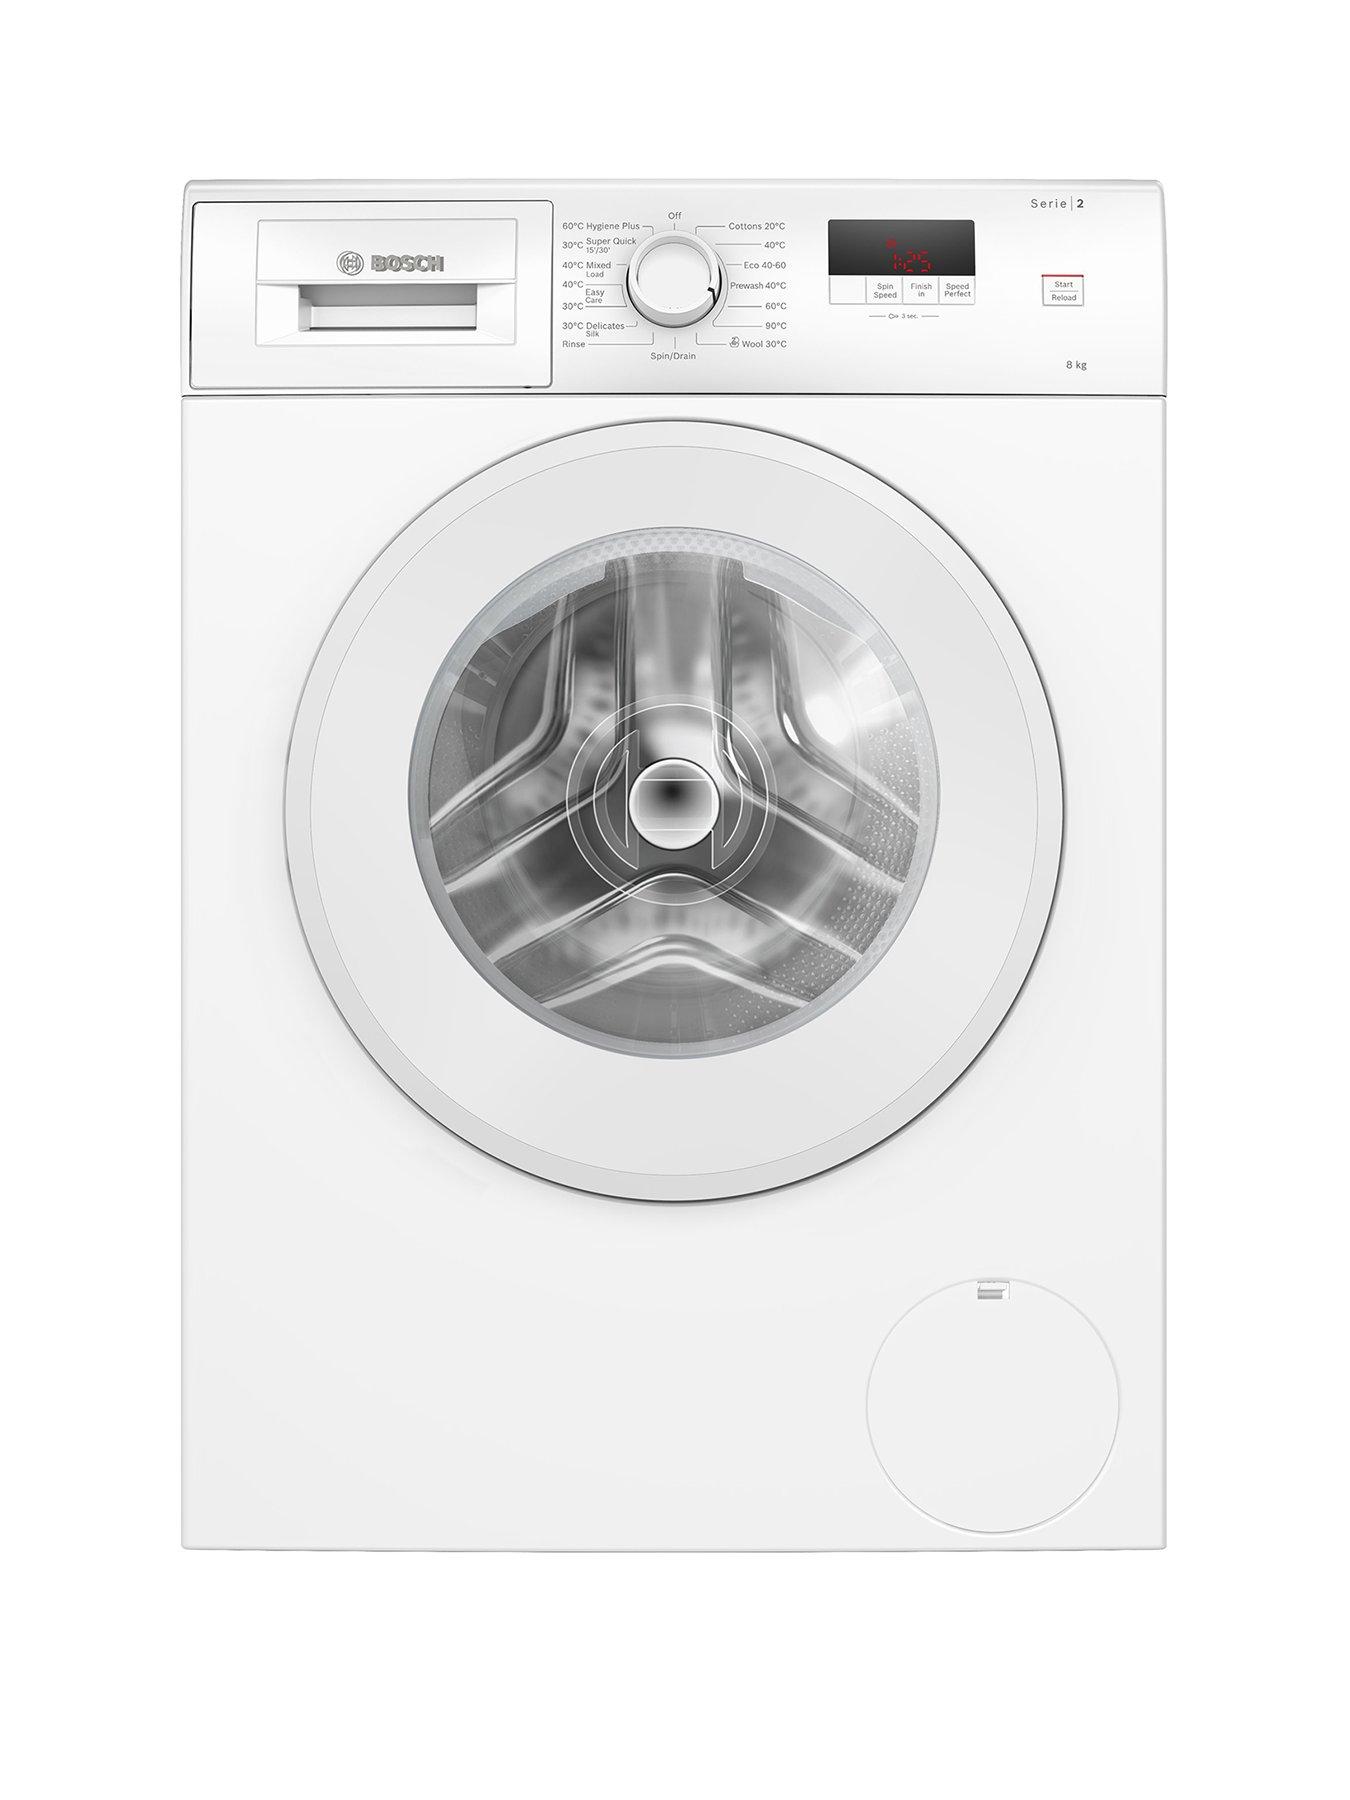 Bosch Series 2 Wge03408Gb 8Kg Load, 1400 Rpm Spin Freestanding Washing Machine - Speedperfect, Eco Silence Drive, Small Led Display - White